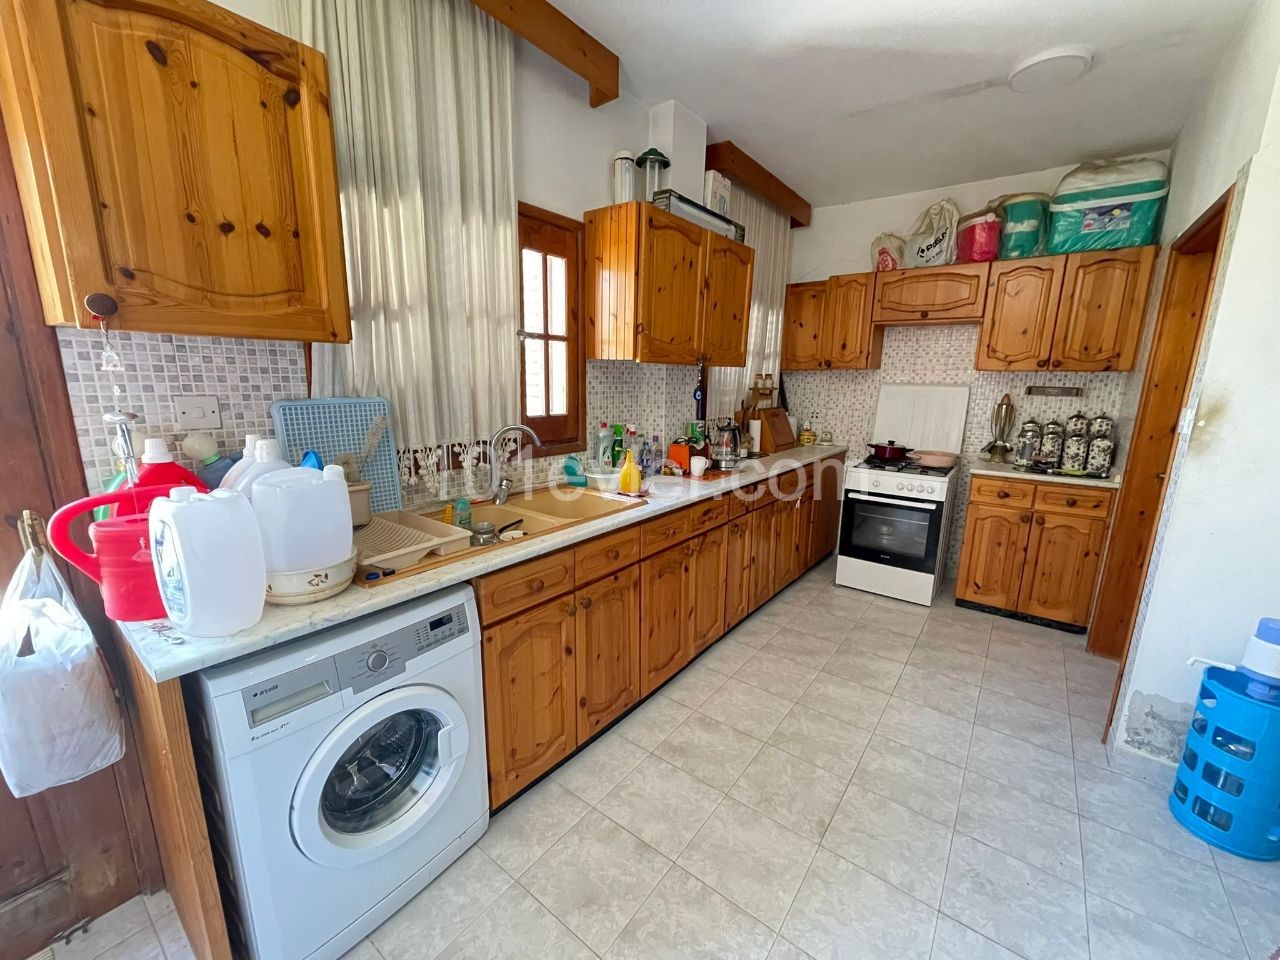 Corner Twin House For Sale With A Beautiful Location Close To The Main Road In Gonyeli! ** 